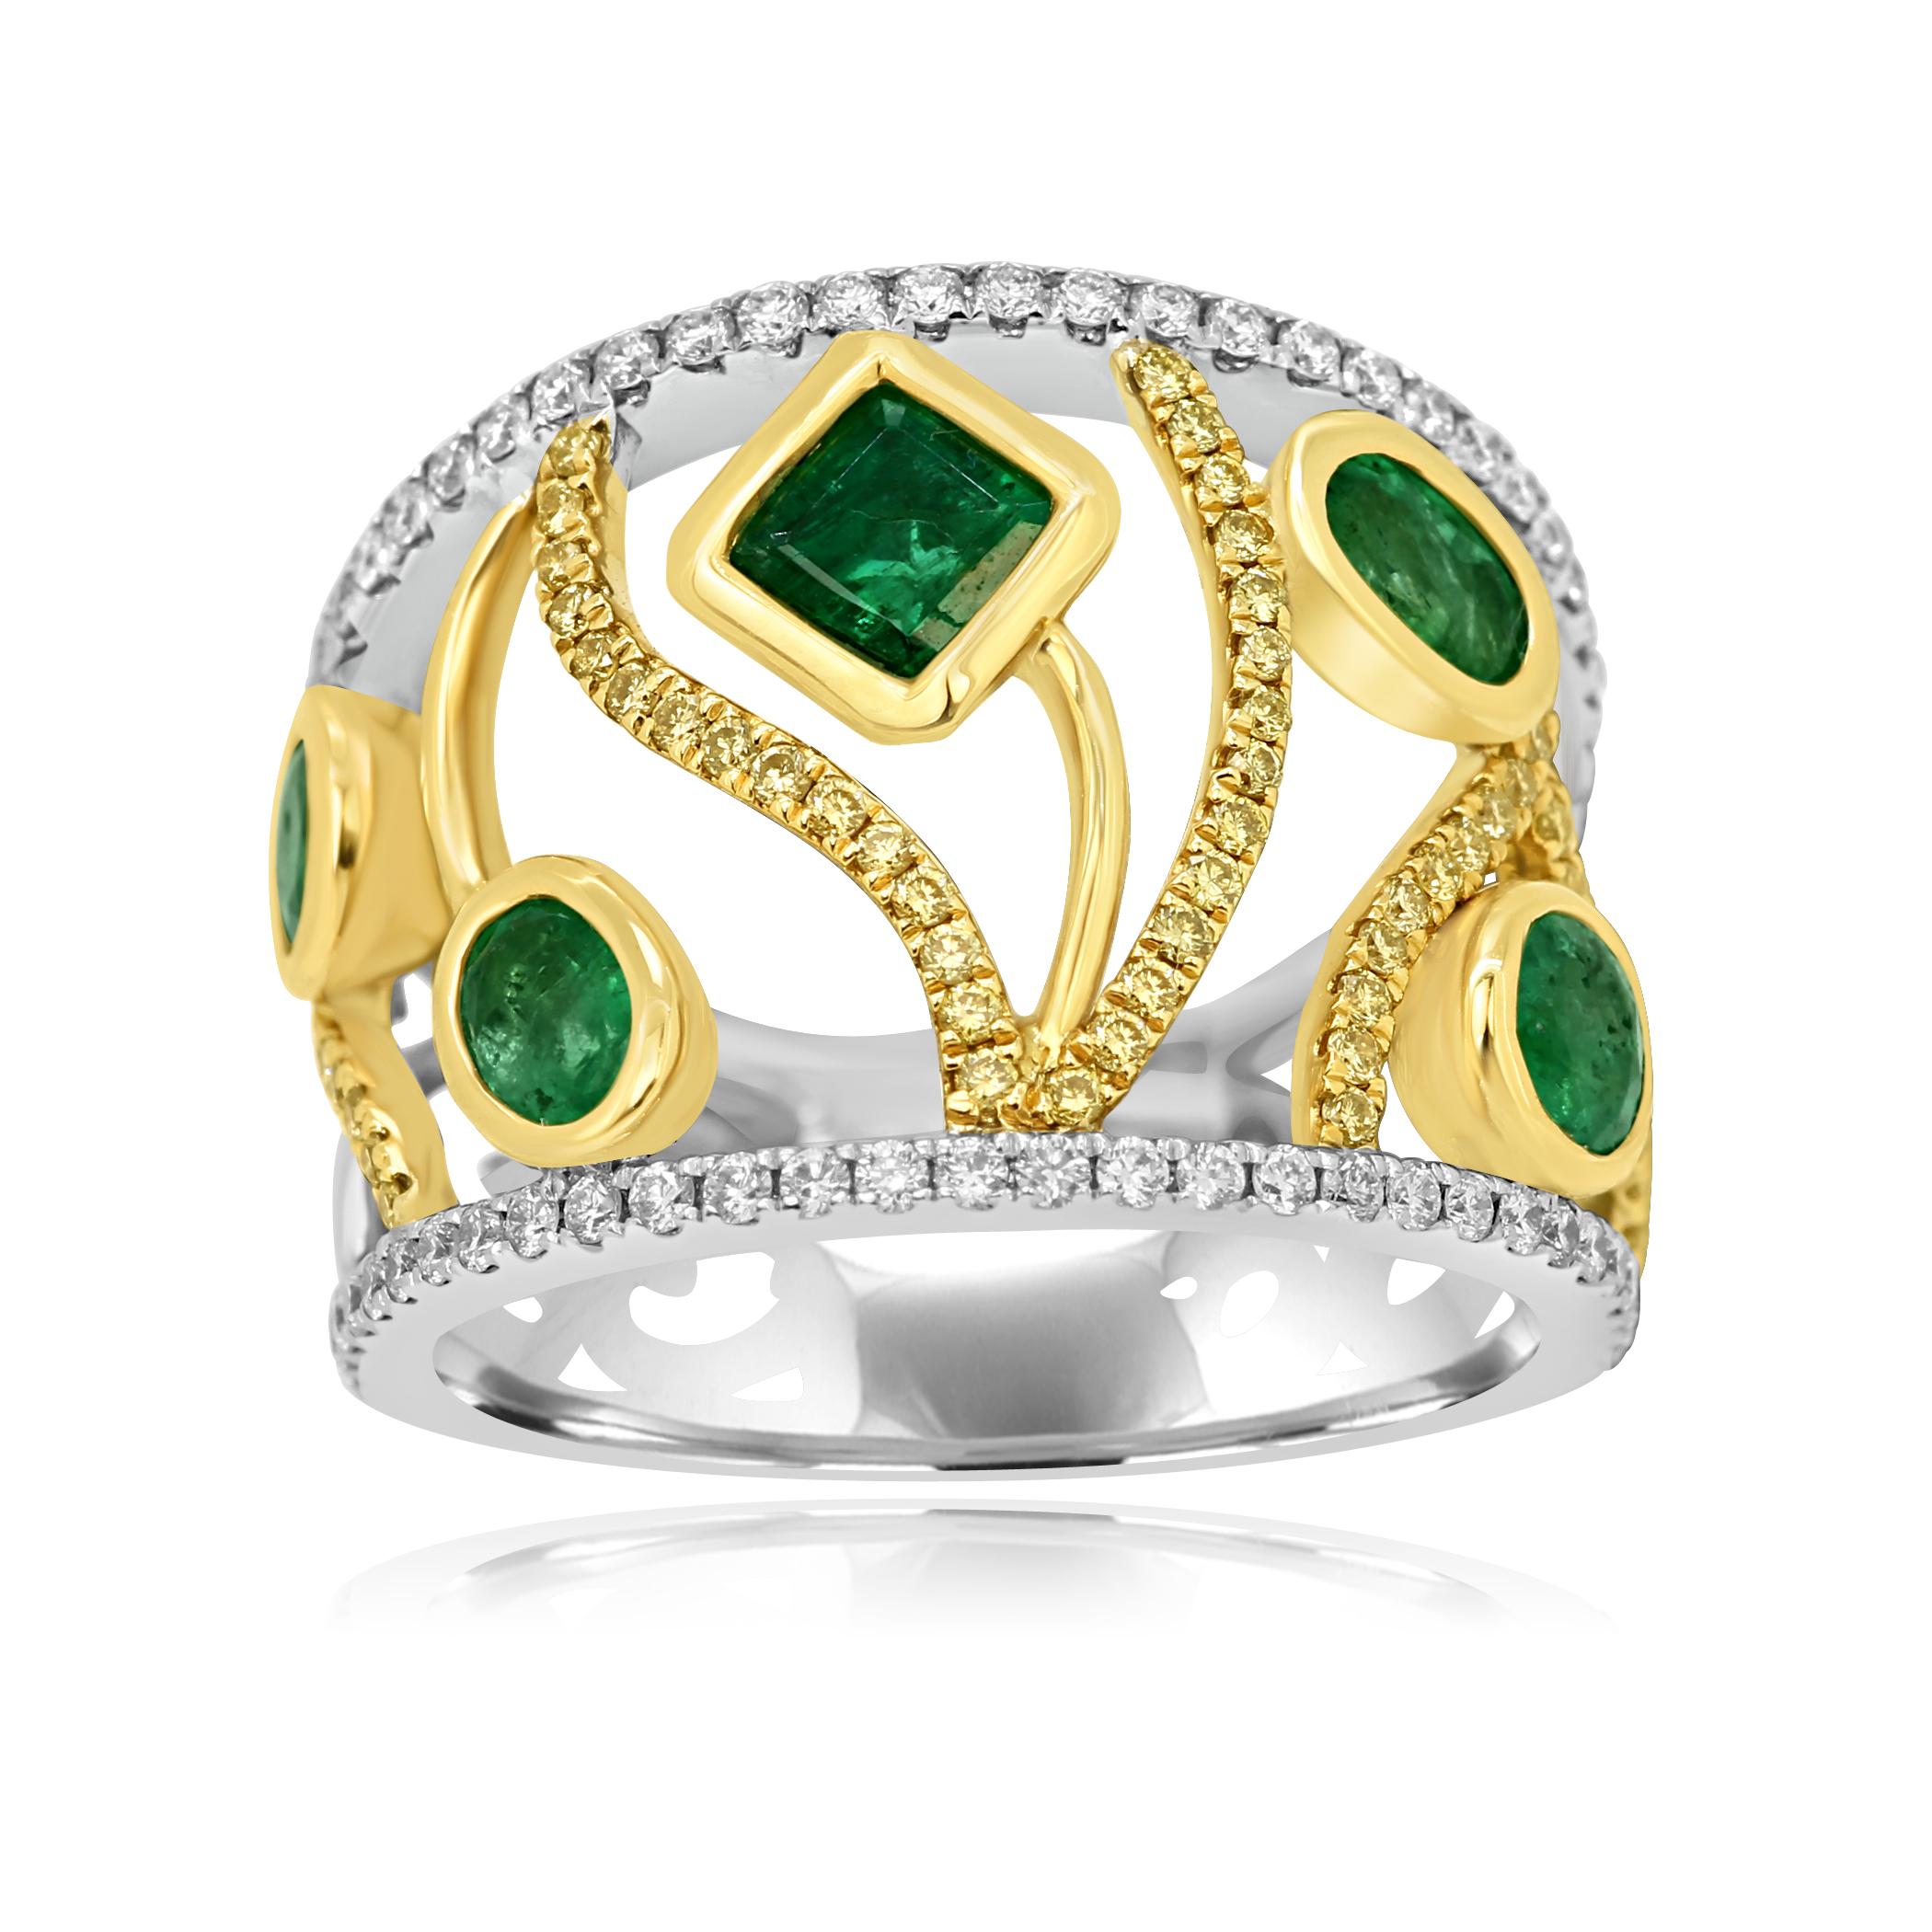 5 Emerald Mix Shapes 1.26 Carat Set alongside Natural Fancy Yellow Diamond SI Rounds 0.24 Carat and Colorless VS-SI diamond Rounds 0.35 Carat in Stunning 14K White and Yellow Gold Fashion Cocktail Band Ring.
Total Weight 1.85 Carat

5 Emerald Weight